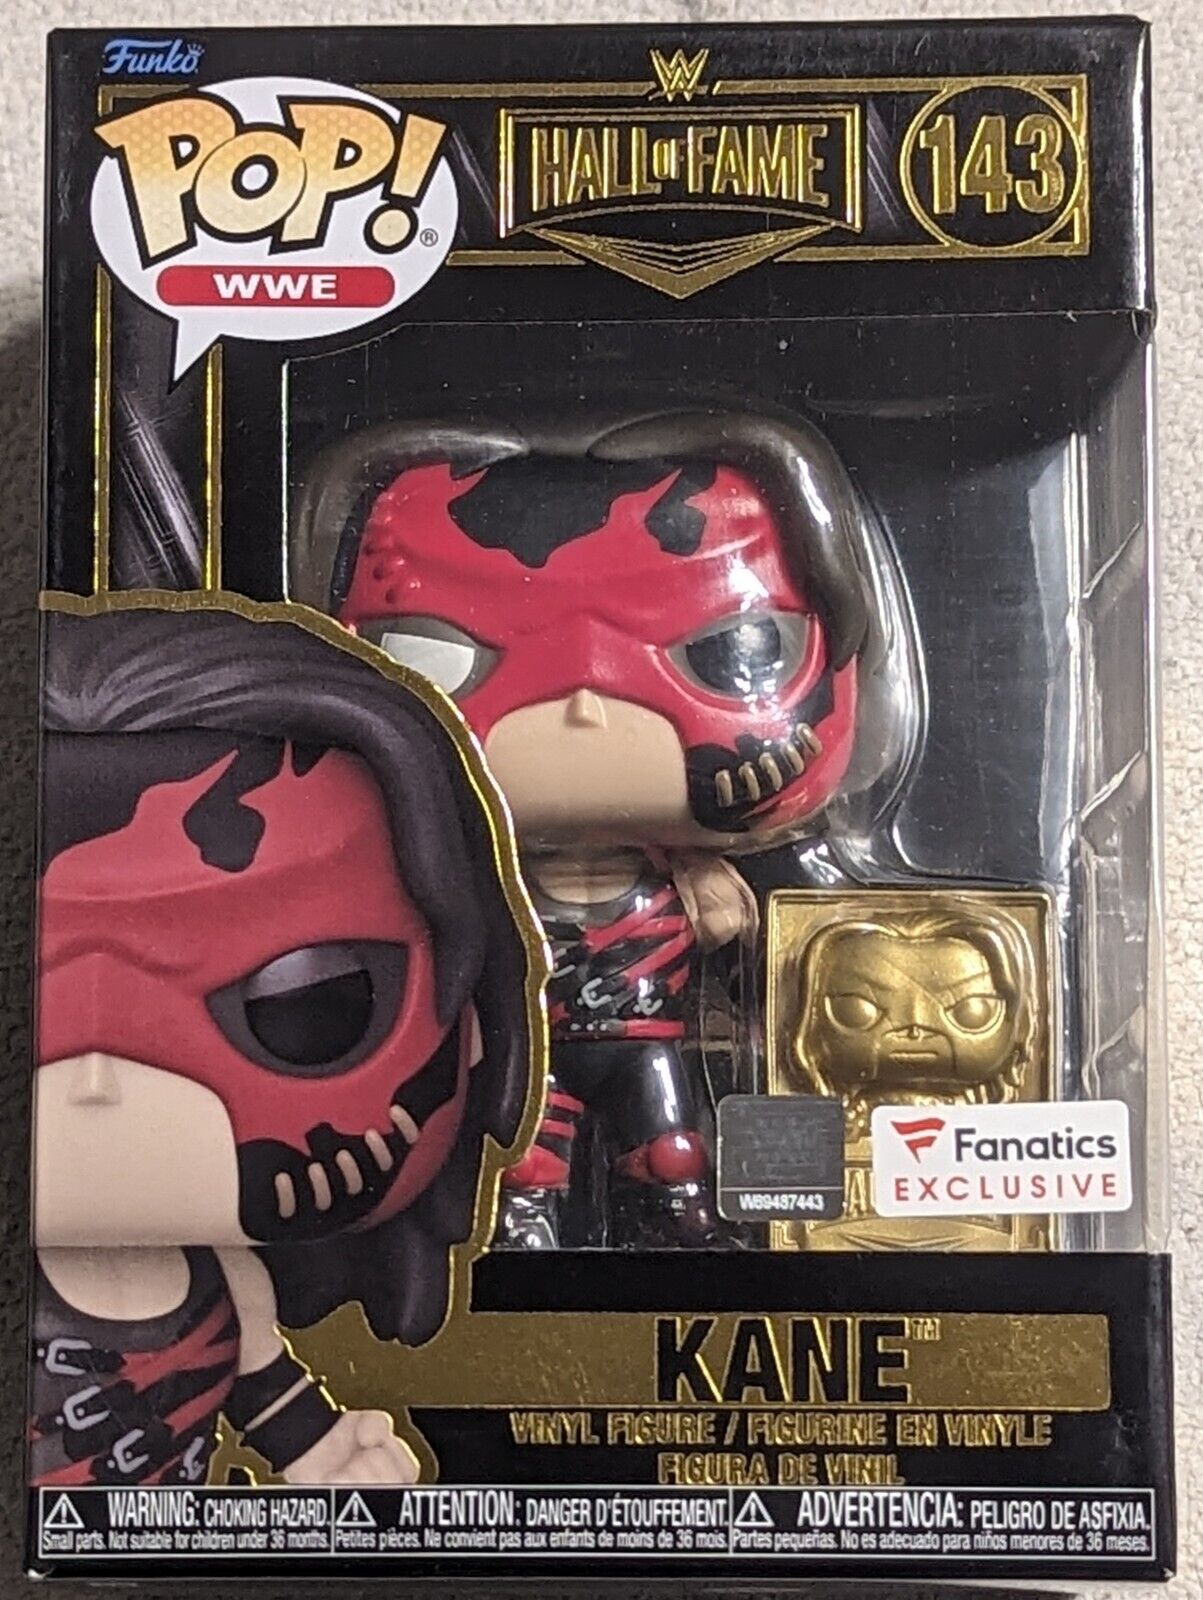 BRAND NEW Funko Pop Kane WWE Hall of Fame Exclusive LE 5000